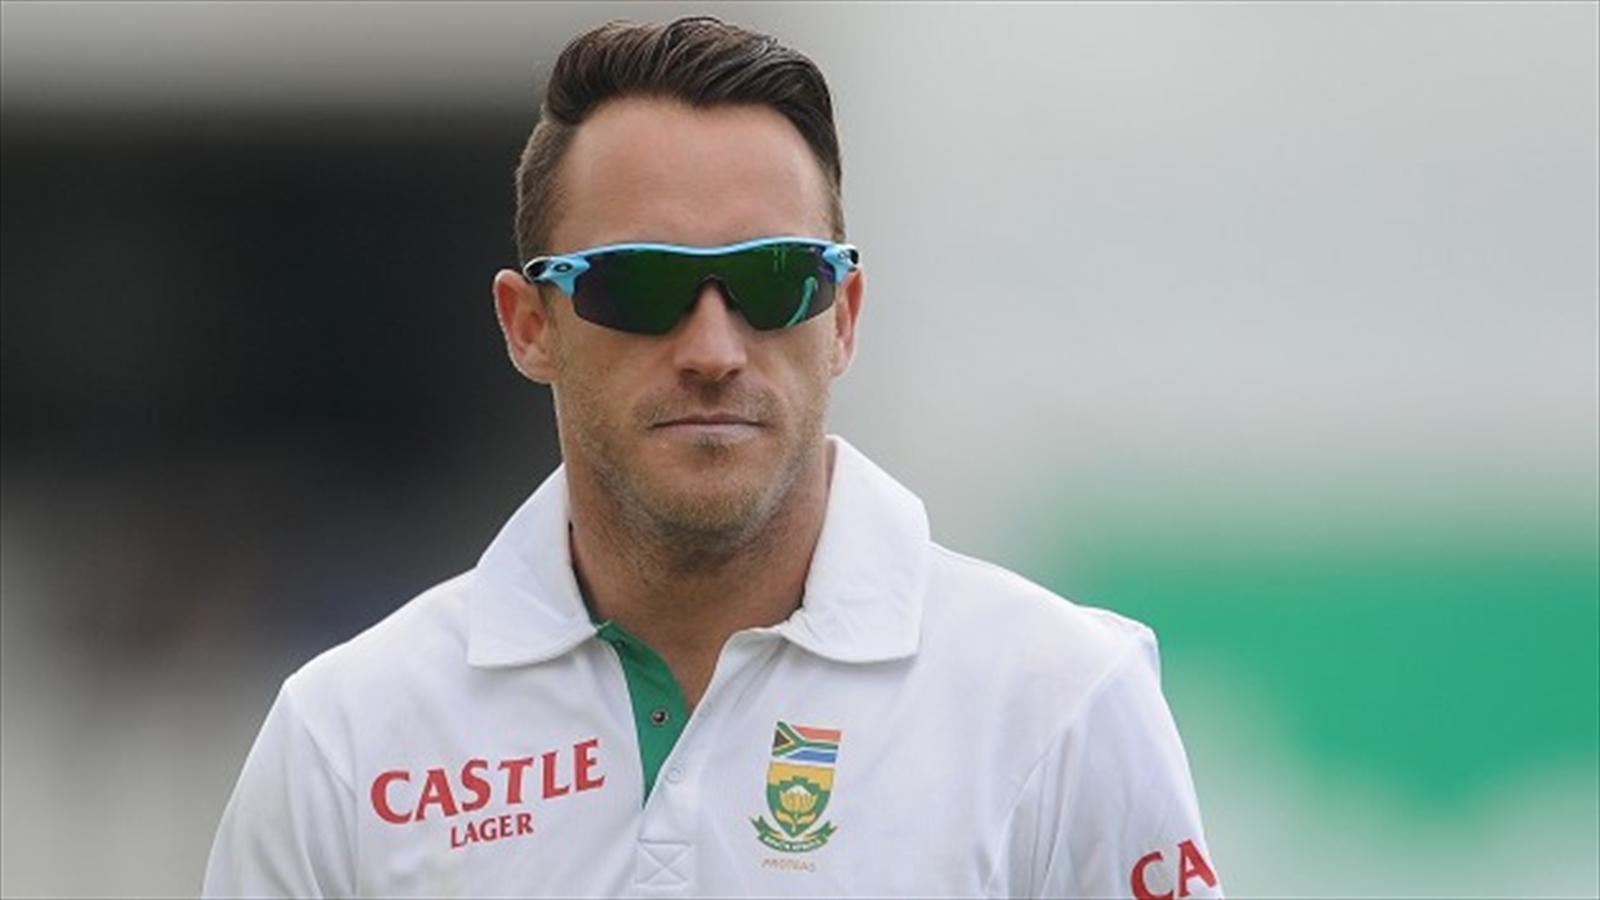 South Africa captain Faf du Plessis charged with ball tampering